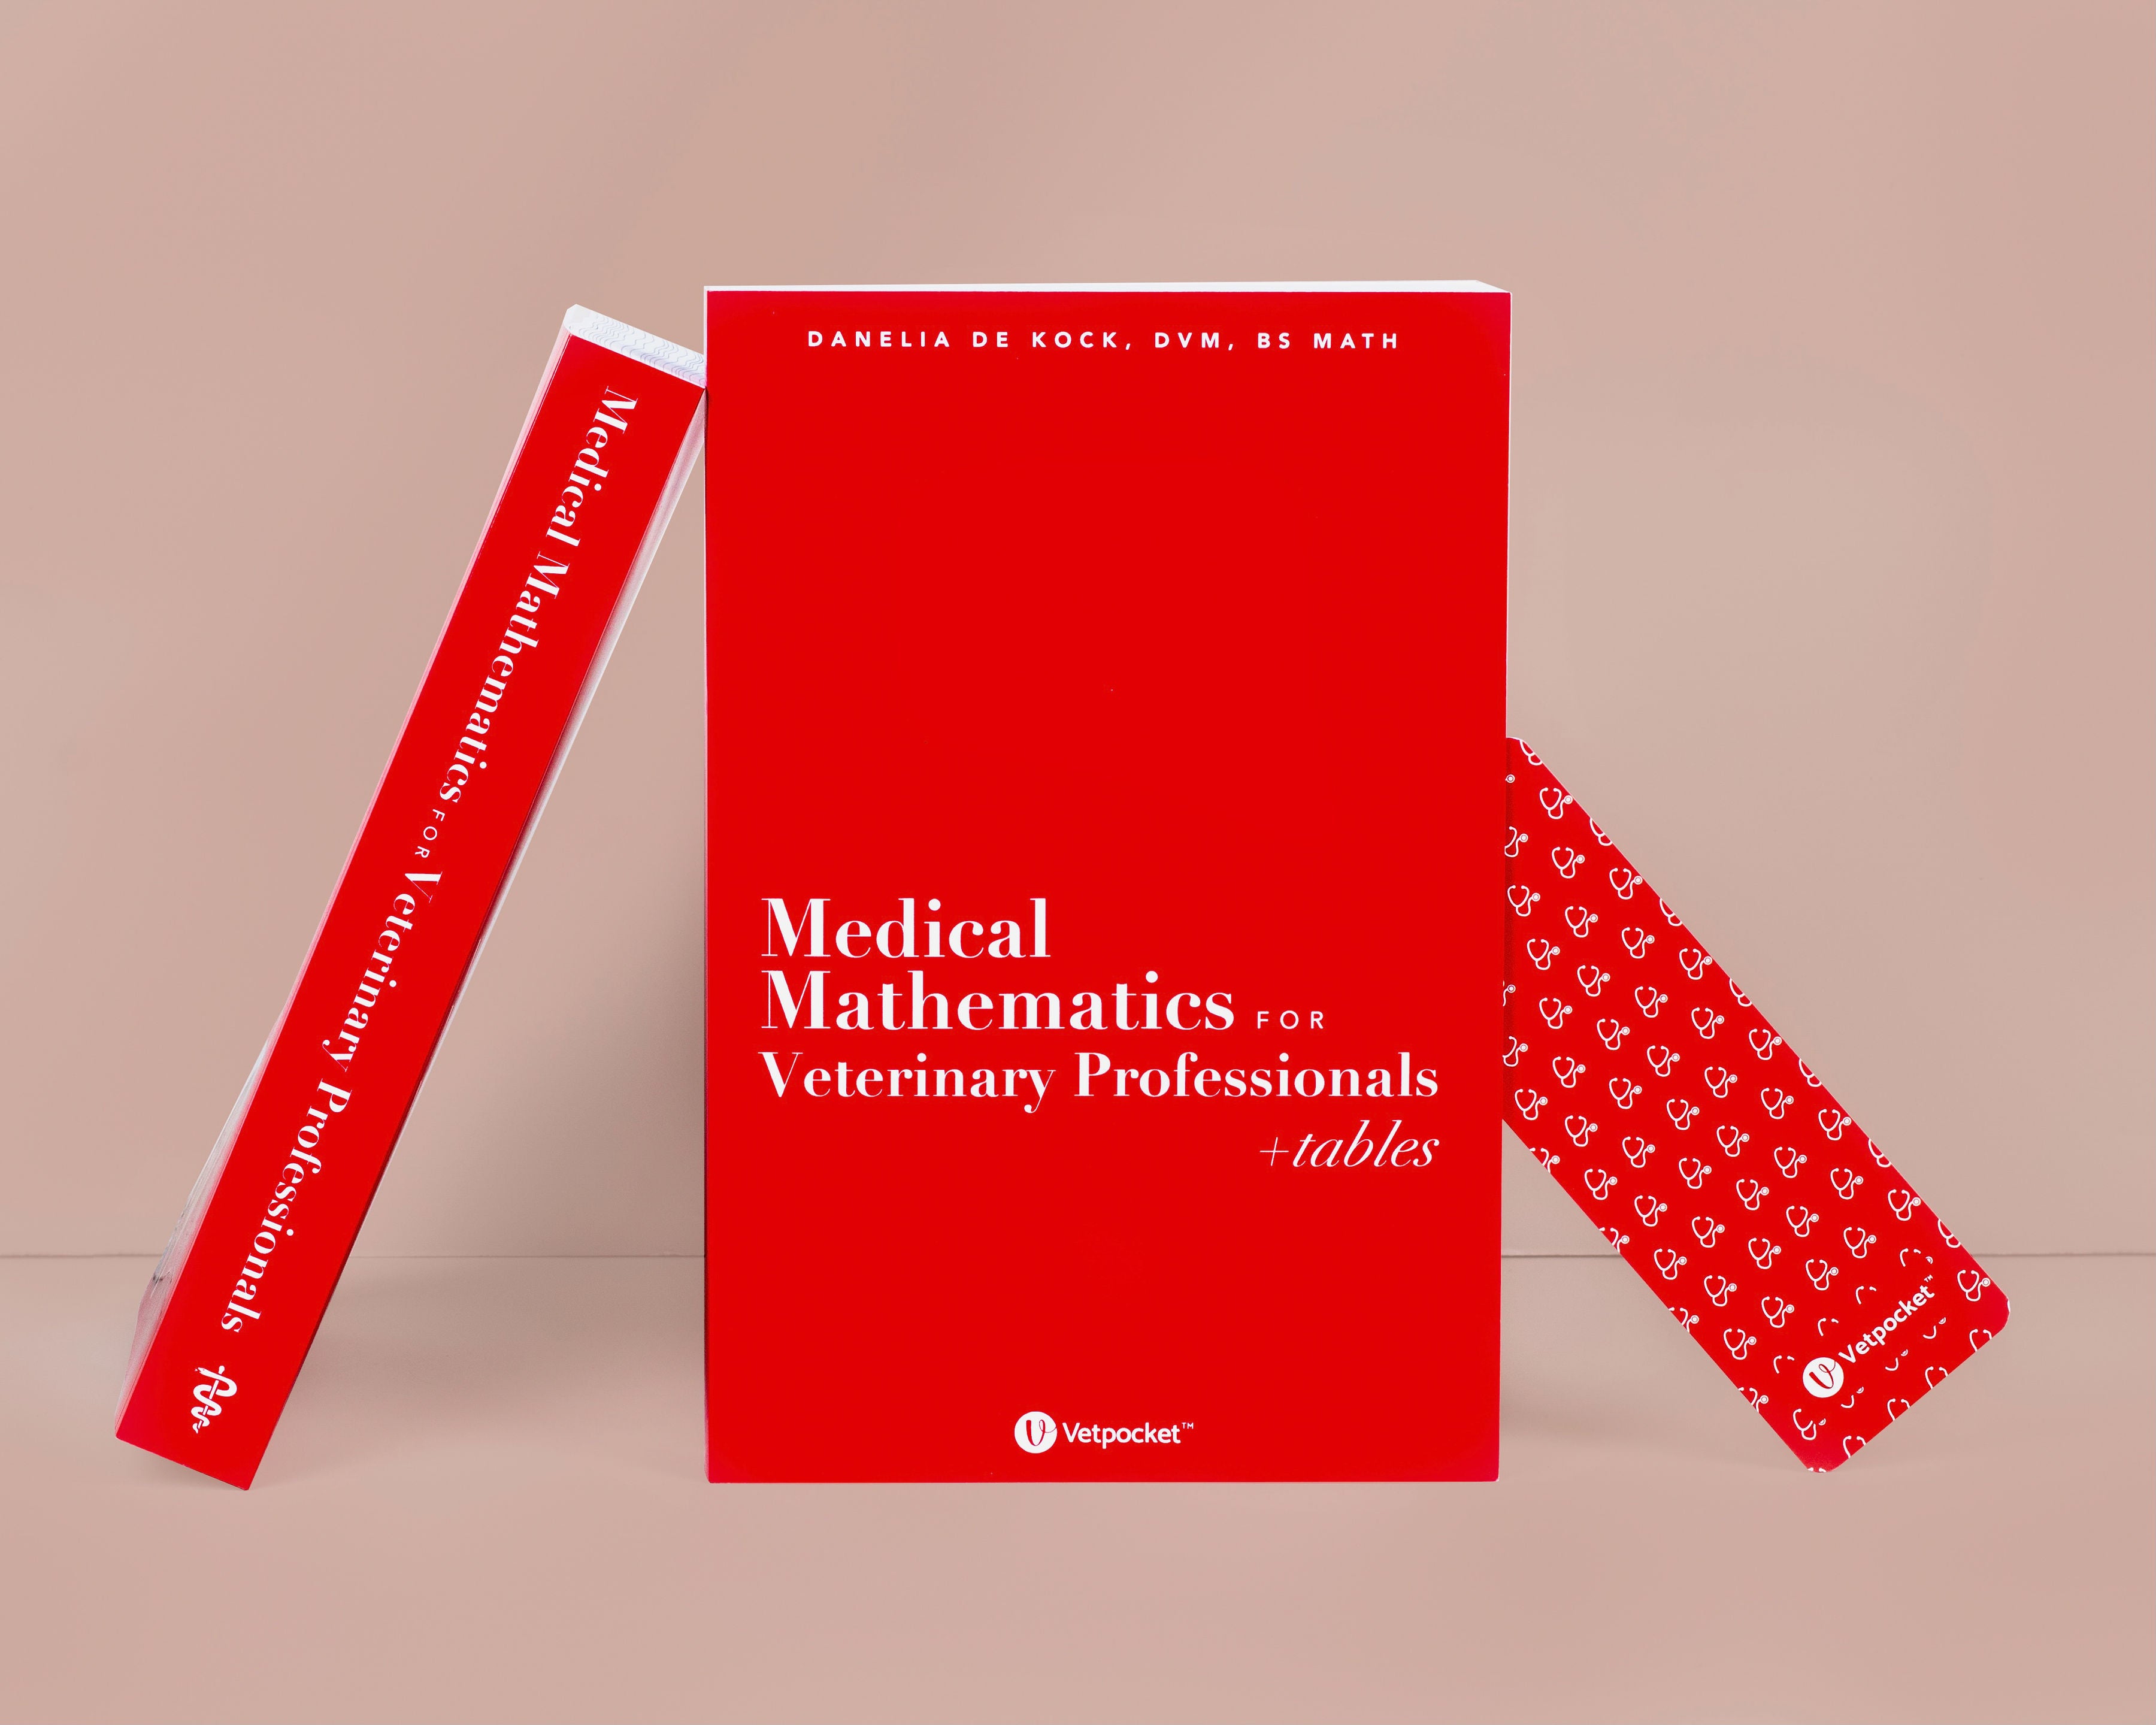 Medical Mathematics for Veterinary Professionals + tables